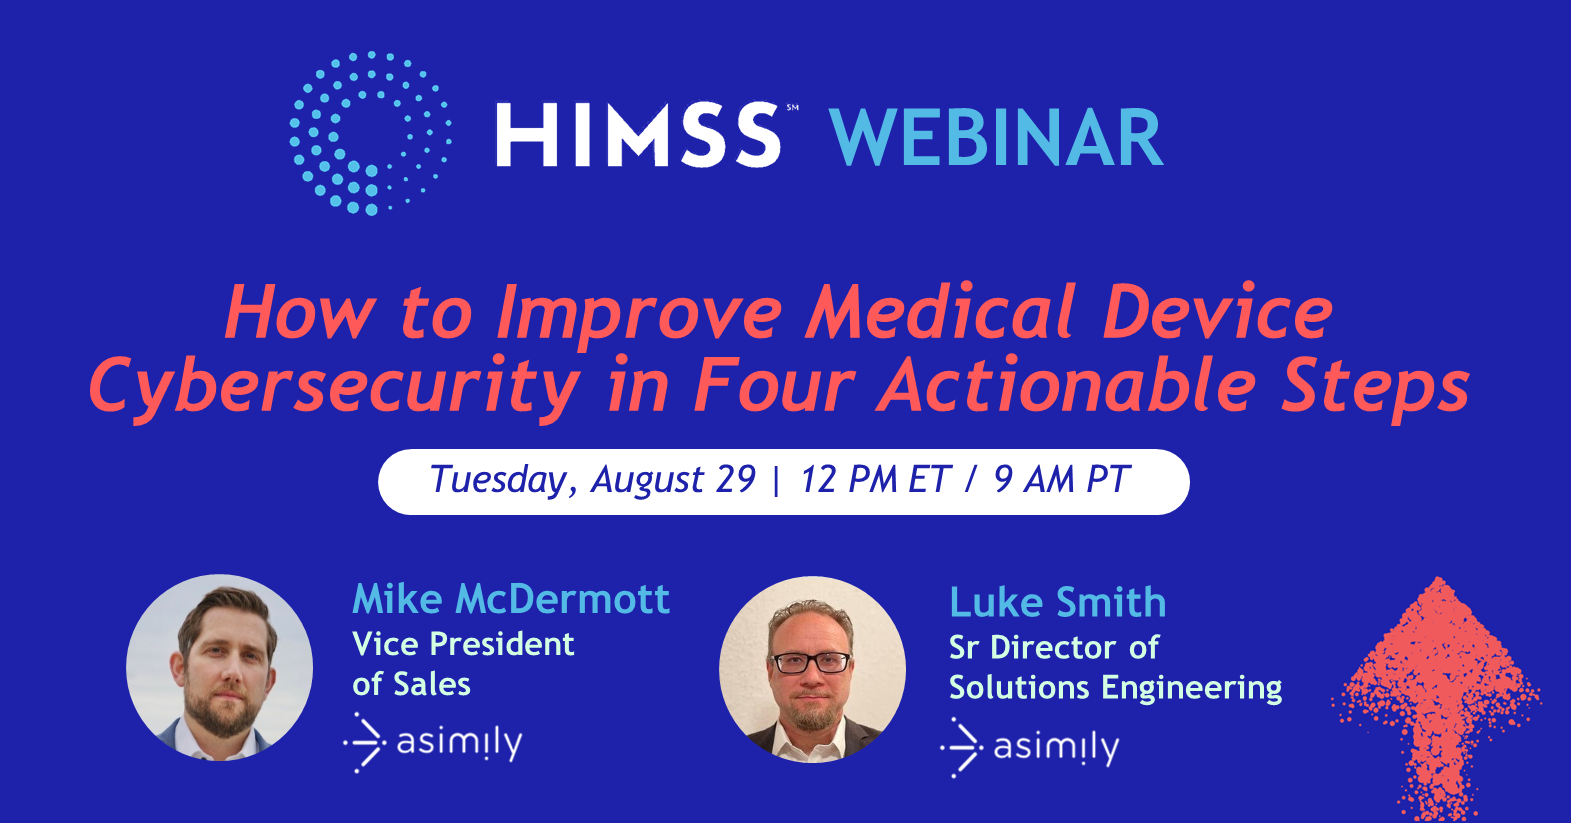 HIMSS Webinar: How to Improve Medical Device Cybersecurity in Four Actionable Steps